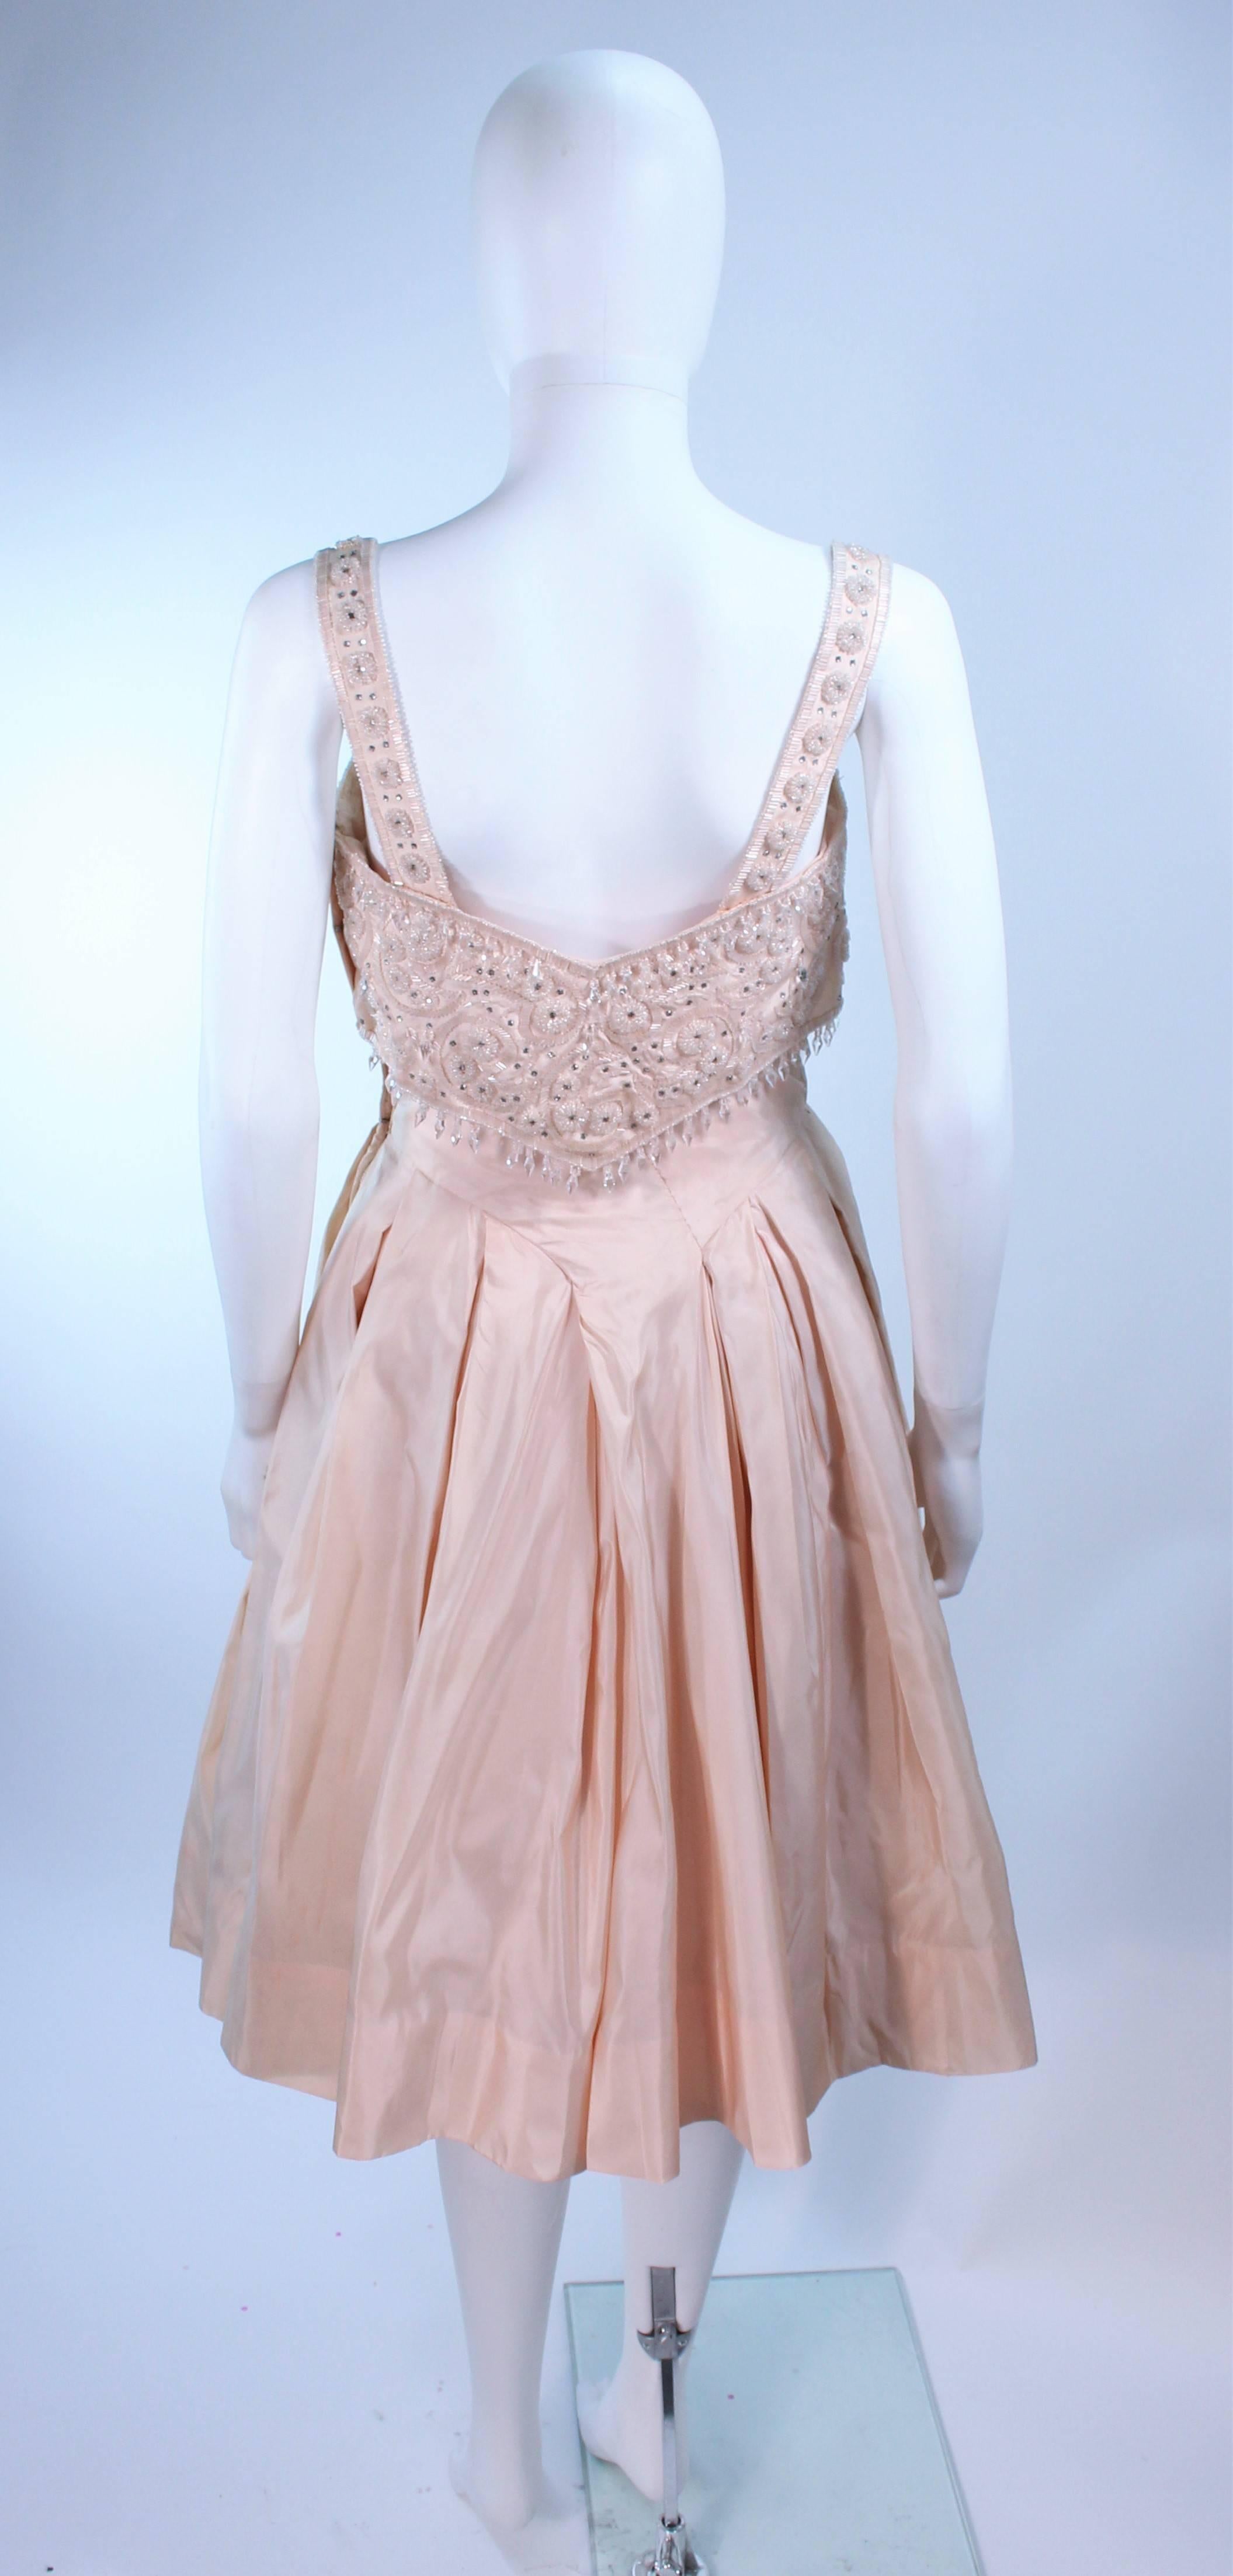 EDITH HEYMAN 1950's Pink Silk Cocktail Embellished Dress Size 4 For Sale 1